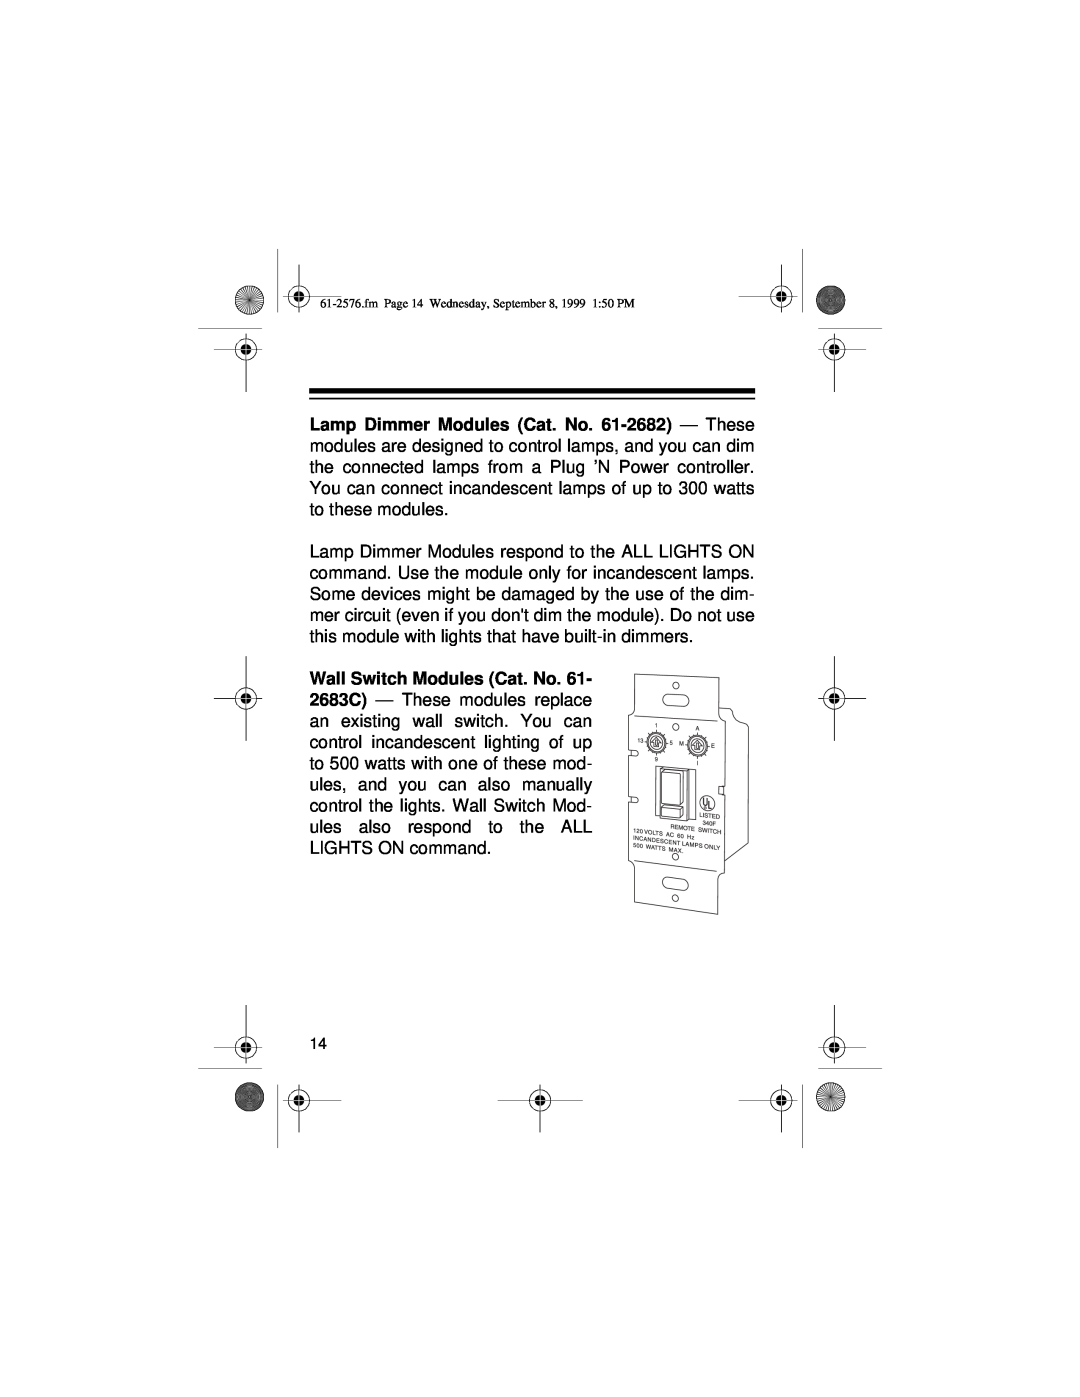 Radio Shack Wireless Remote Control System owner manual fm Page 14 Wednesday, September 8, 1999 150 PM 